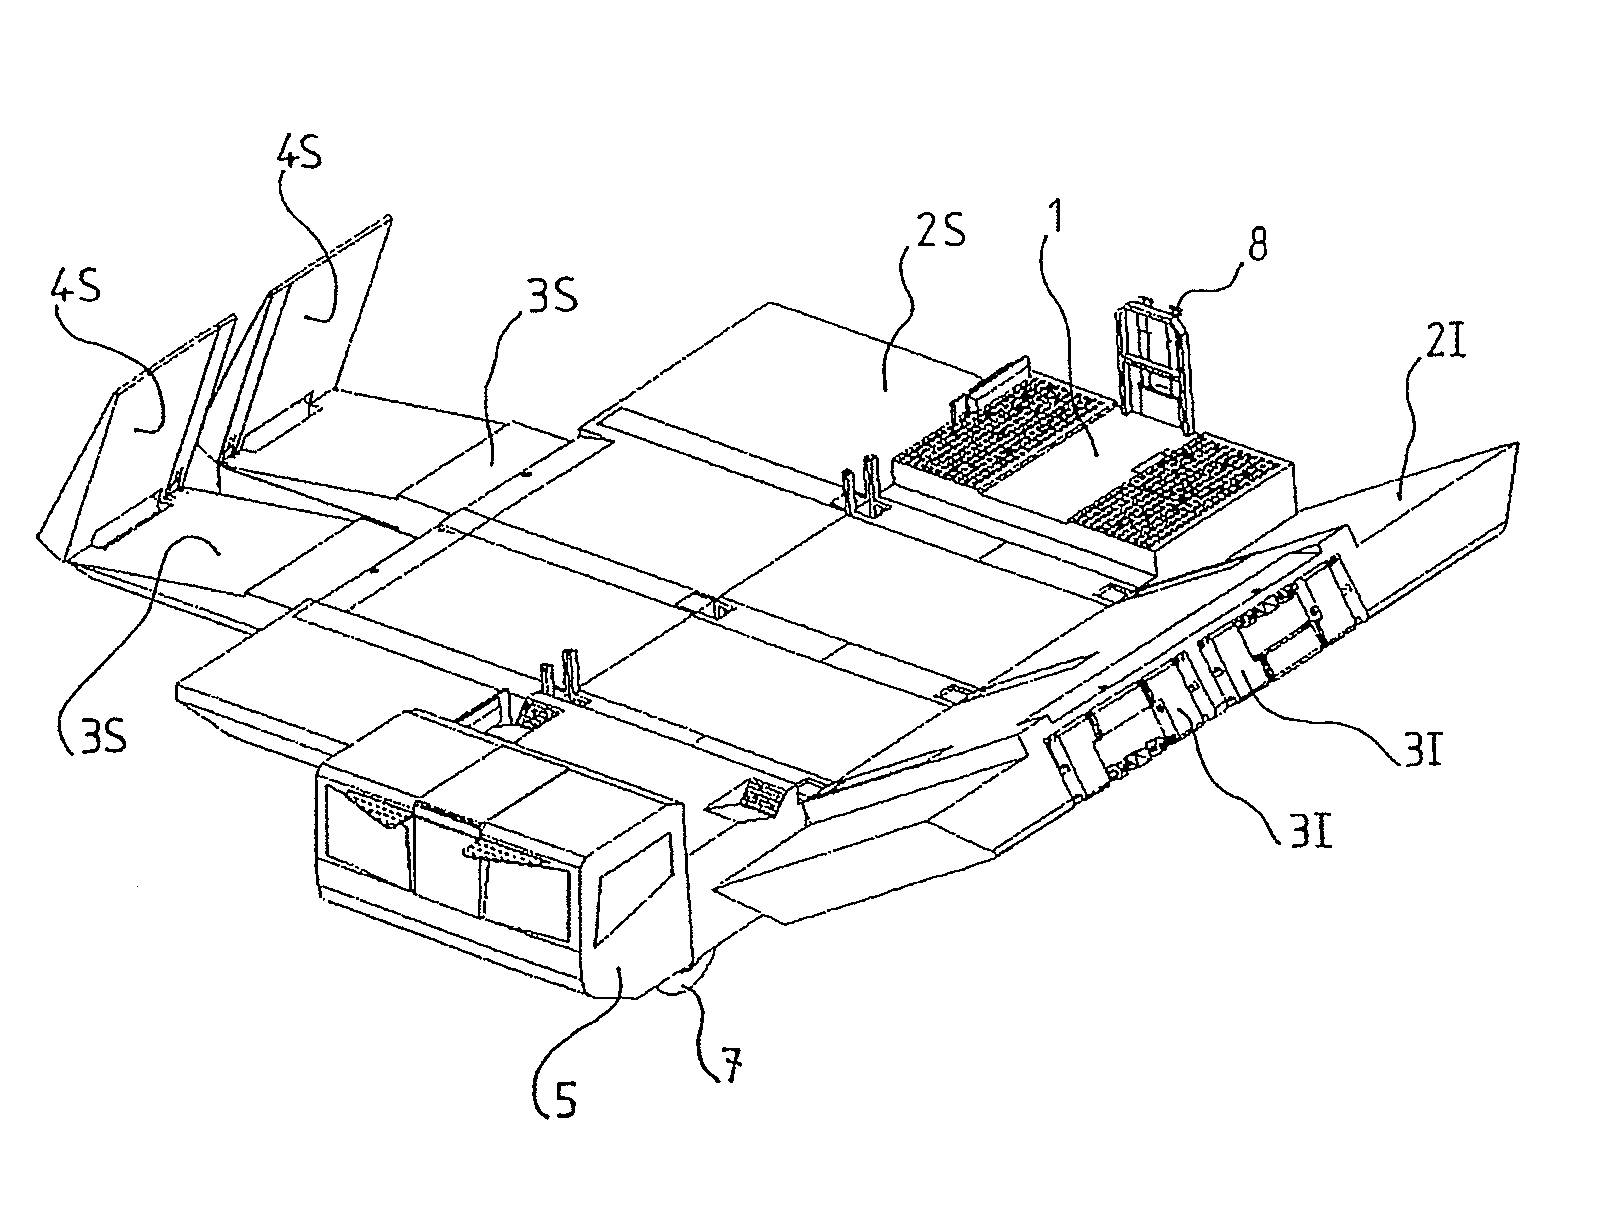 Amphibious vehicle for bridging a water-filled opening